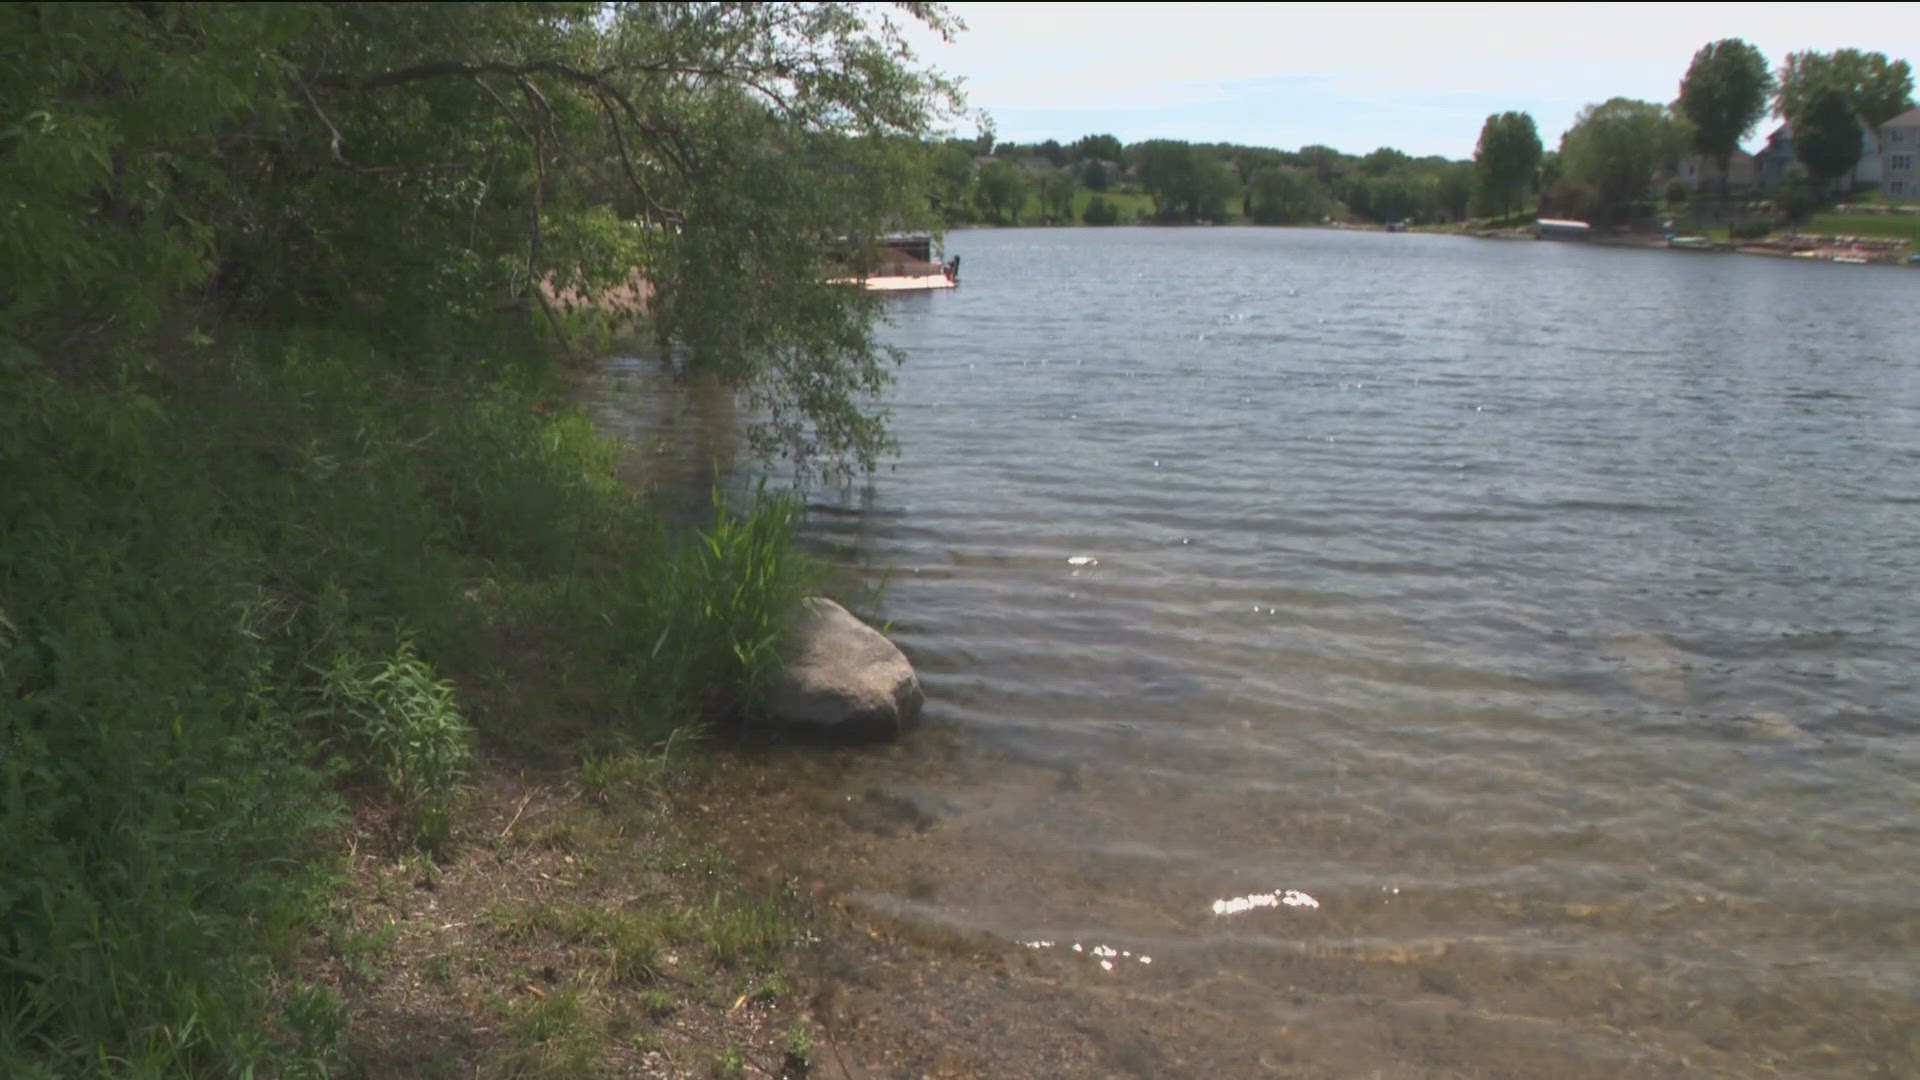 An investigation is underway after a man died while clearing weeds at Lac Lavon Lake in Apple Valley.